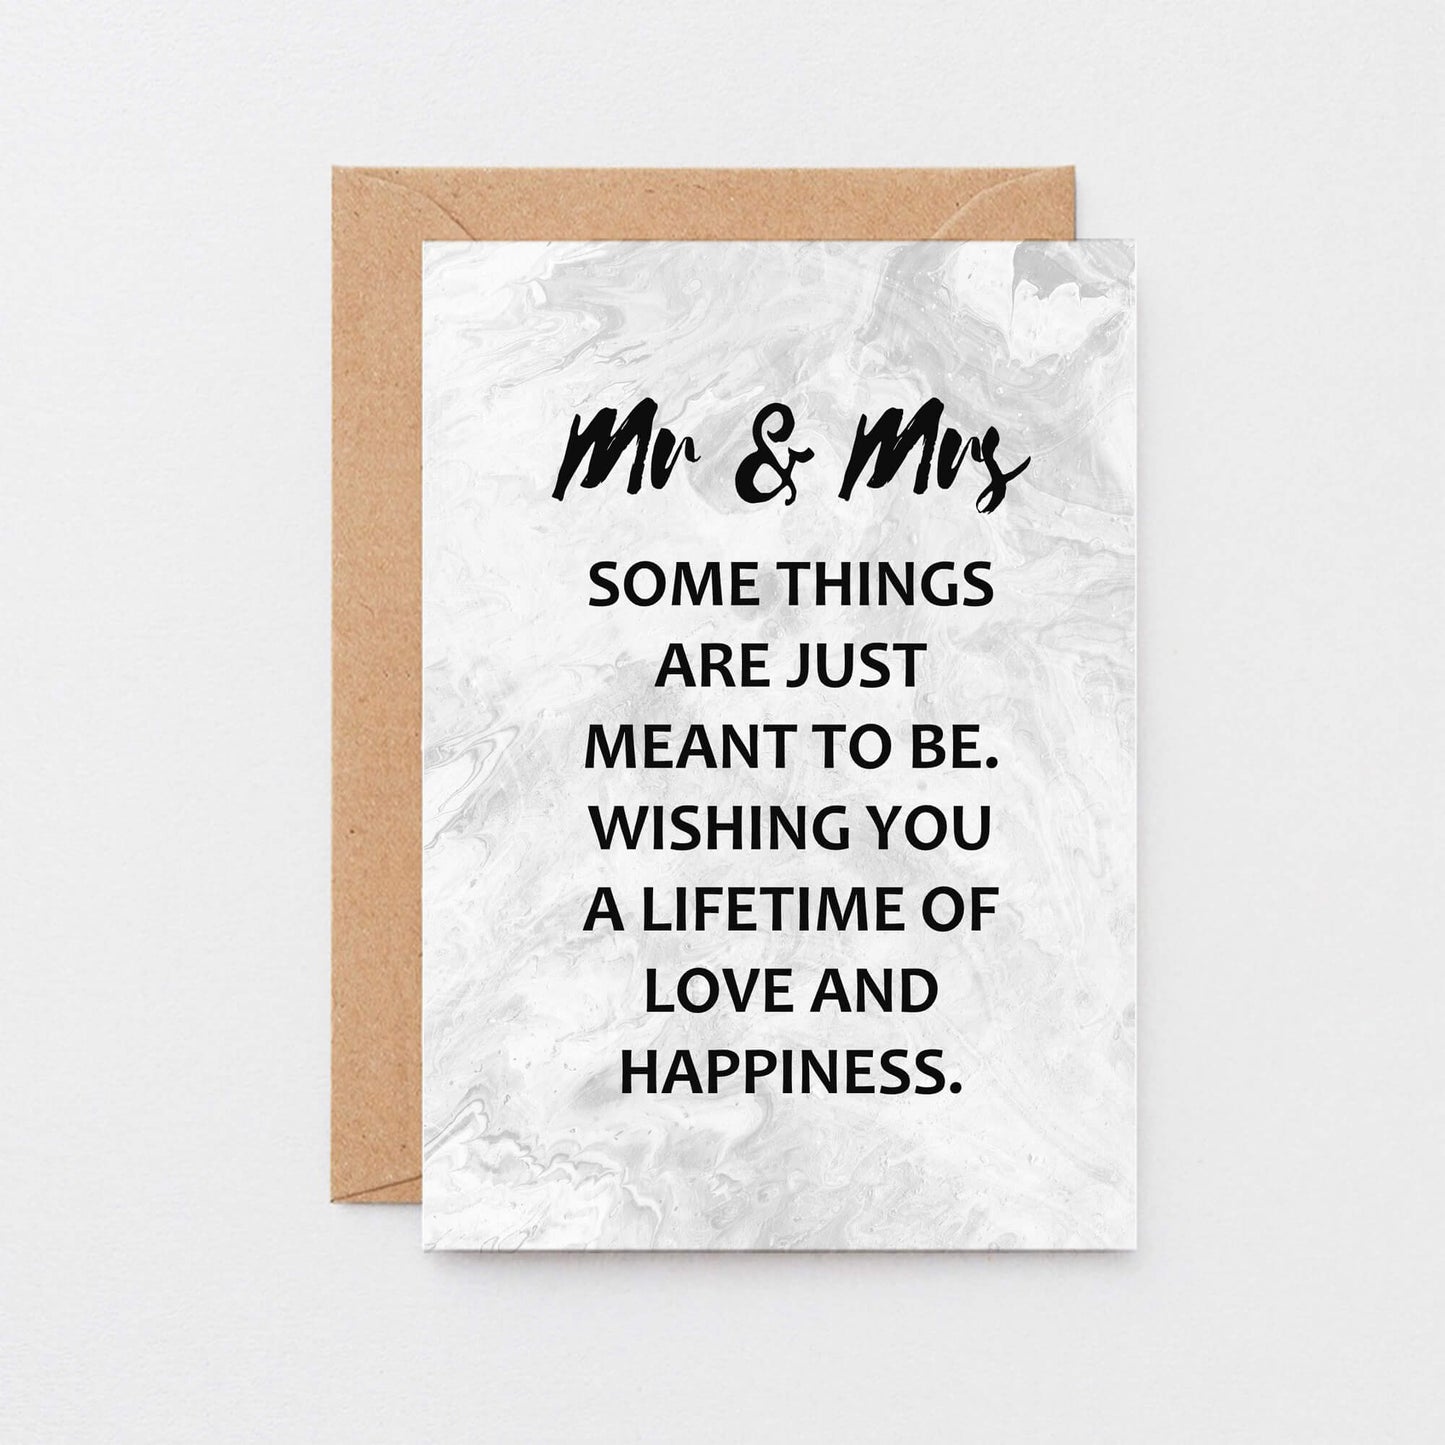 Wedding Congratulations Card by SixElevenCreations. Reads Mr & Mrs Some things are just meant to be. Wishing you a lifetime of love and happiness. Product Code SE3016A6